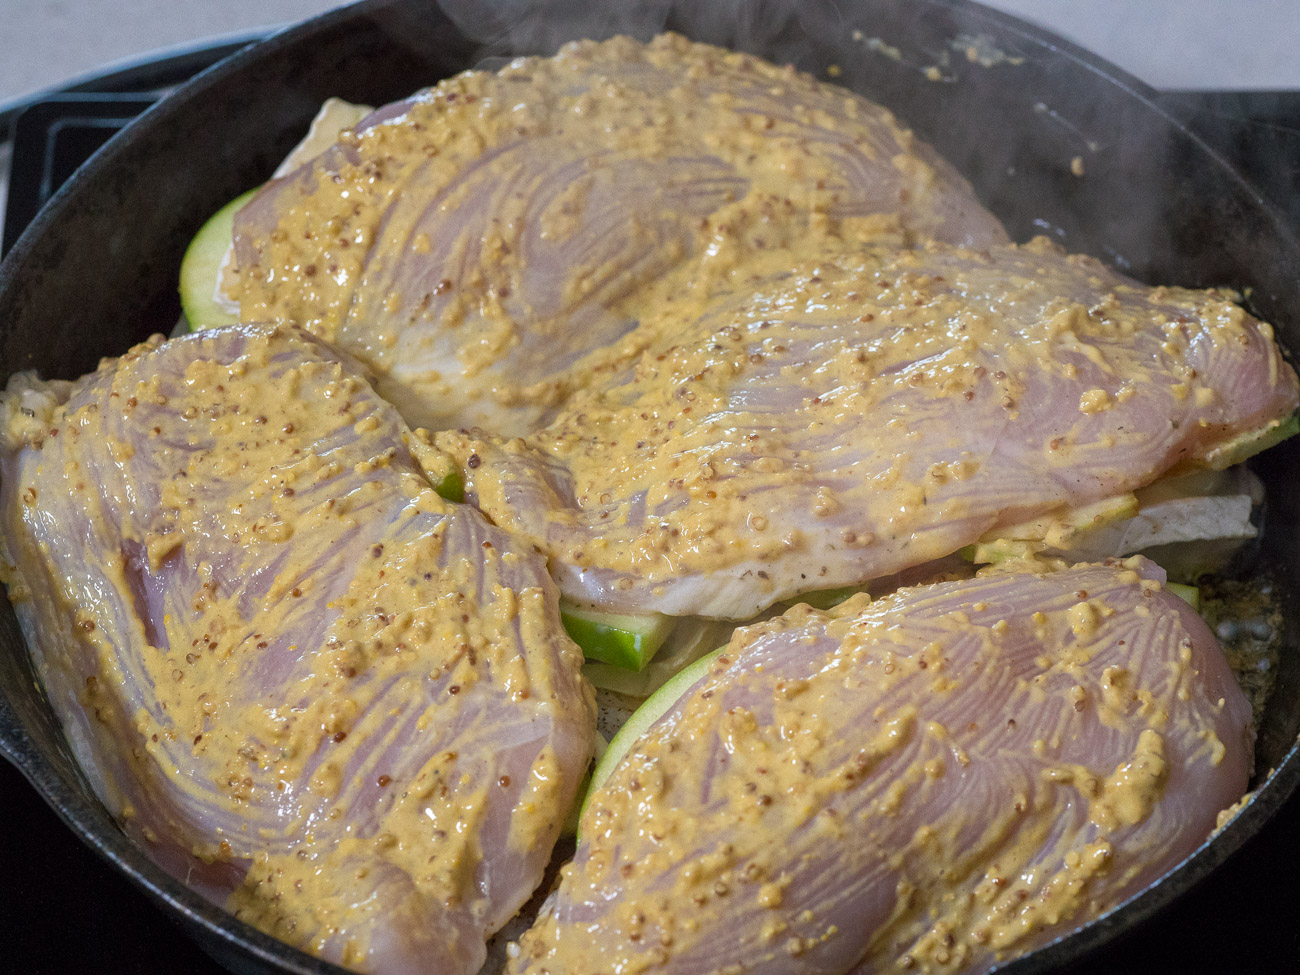 Mix together the mustards in a small bowl and brush half on the tops of the chicken breasts.